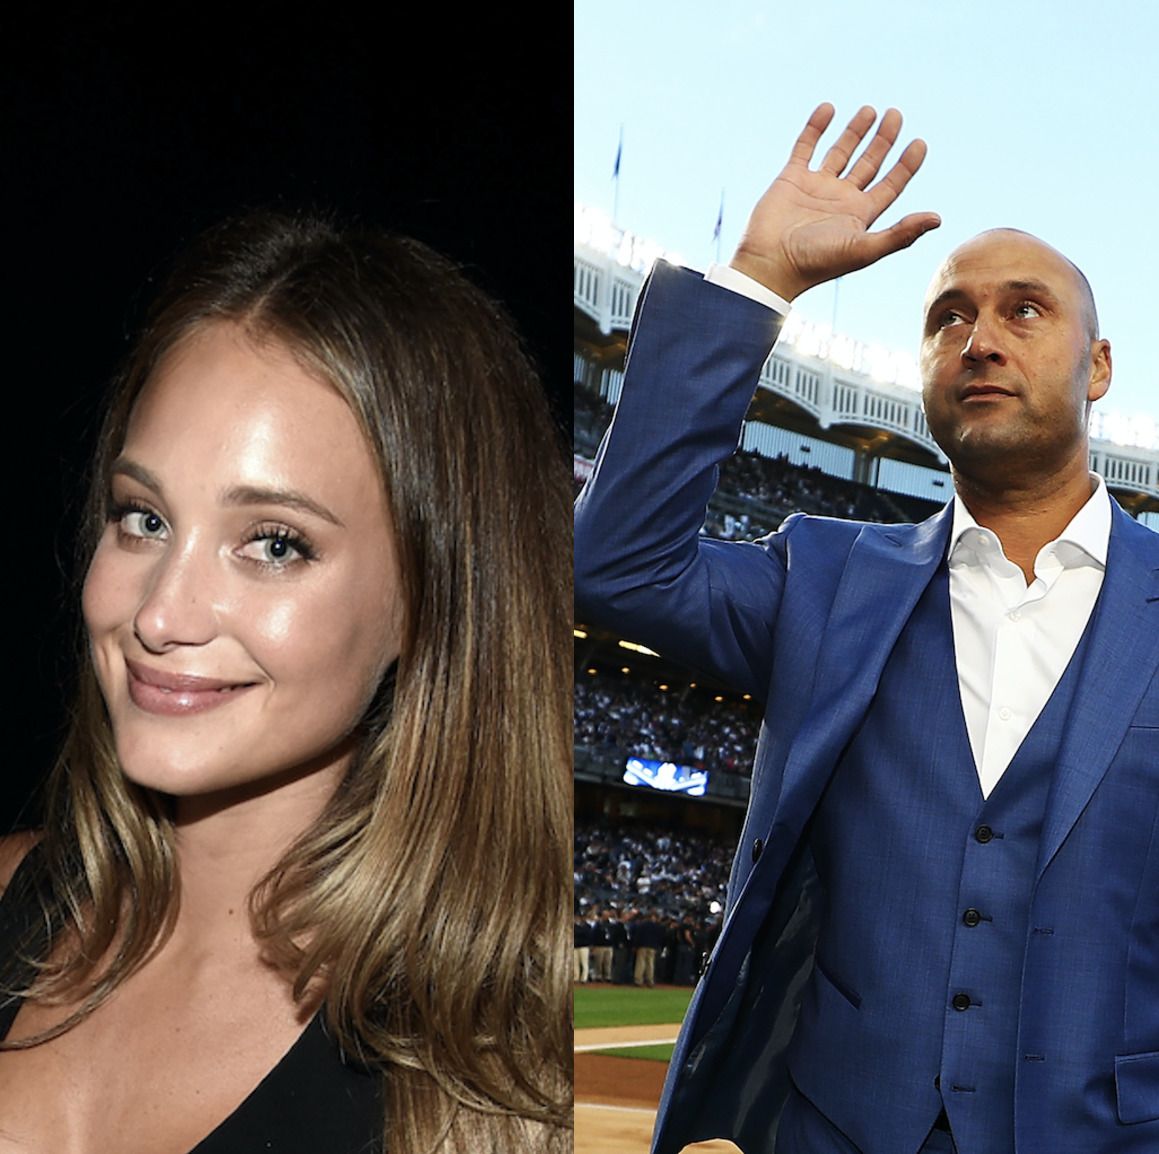 Derek Jeter's Wife Reveals They're Expecting A Baby Girl